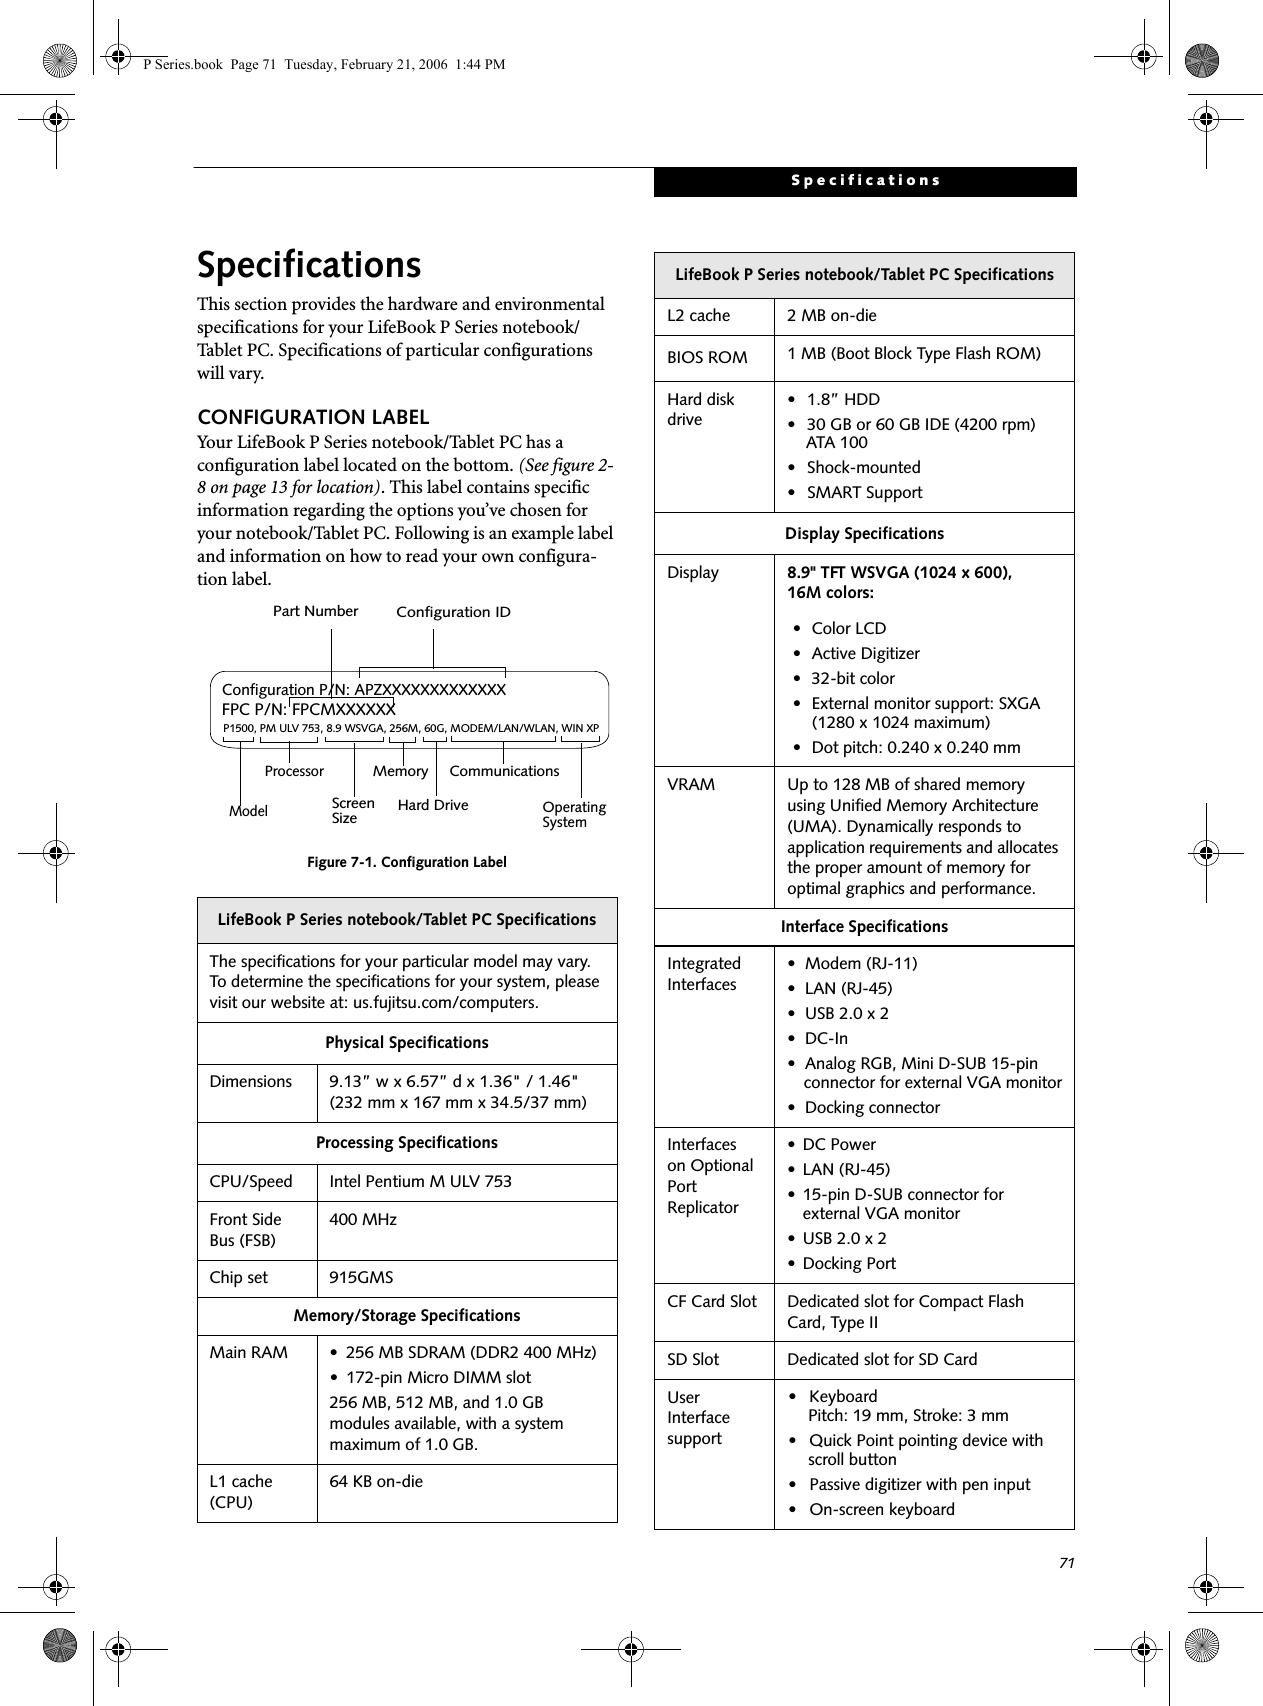 71SpecificationsSpecificationsThis section provides the hardware and environmental specifications for your LifeBook P Series notebook/Tablet PC. Specifications of particular configurations will vary.CONFIGURATION LABELYour LifeBook P Series notebook/Tablet PC has a configuration label located on the bottom. (See figure 2-8 on page 13 for location). This label contains specific information regarding the options you’ve chosen for your notebook/Tablet PC. Following is an example label and information on how to read your own configura-tion label.Figure 7-1. Configuration LabelLifeBook P Series notebook/Tablet PC SpecificationsThe specifications for your particular model may vary. To determine the specifications for your system, please visit our website at: us.fujitsu.com/computers.Physical SpecificationsDimensions 9.13” w x 6.57” d x 1.36&quot; / 1.46&quot; (232 mm x 167 mm x 34.5/37 mm)Processing SpecificationsCPU/Speed Intel Pentium M ULV 753Front Side Bus (FSB)400 MHzChip set 915GMSMemory/Storage SpecificationsMain RAM • 256 MB SDRAM (DDR2 400 MHz)• 172-pin Micro DIMM slot256 MB, 512 MB, and 1.0 GB modules available, with a system maximum of 1.0 GB.L1 cache (CPU)64 KB on-die P1500, PM ULV 753, 8.9 WSVGA, 256M, 60G, MODEM/LAN/WLAN, WIN XPConfiguration P/N: APZXXXXXXXXXXXXXFPC P/N: FPCMXXXXXXModelProcessorScreenSizeOperatingSystemHard Drive Part NumberConfiguration IDMemory CommunicationsL2 cache 2 MB on-die BIOS ROM 1 MB (Boot Block Type Flash ROM)Hard disk drive• 1.8” HDD• 30 GB or 60 GB IDE (4200 rpm)ATA 100• Shock-mounted• SMART SupportDisplay SpecificationsDisplay 8.9&quot; TFT WSVGA (1024 x 600), 16M colors:• Color LCD• Active Digitizer• 32-bit color• External monitor support: SXGA (1280 x 1024 maximum)• Dot pitch: 0.240 x 0.240 mmVRAM Up to 128 MB of shared memory using Unified Memory Architecture (UMA). Dynamically responds to application requirements and allocates the proper amount of memory for optimal graphics and performance. Interface SpecificationsIntegrated Interfaces• Modem (RJ-11)• LAN (RJ-45)• USB 2.0 x 2•DC-In• Analog RGB, Mini D-SUB 15-pin connector for external VGA monitor• Docking connectorInterfaceson Optional Port Replicator • DC Power• LAN (RJ-45)• 15-pin D-SUB connector for external VGA monitor• USB 2.0 x 2• Docking PortCF Card Slot Dedicated slot for Compact Flash Card, Type IISD Slot Dedicated slot for SD CardUser Interface support• Keyboard Pitch: 19 mm, Stroke: 3 mm• Quick Point pointing device with scroll button• Passive digitizer with pen input• On-screen keyboardLifeBook P Series notebook/Tablet PC Specifications P Series.book  Page 71  Tuesday, February 21, 2006  1:44 PM